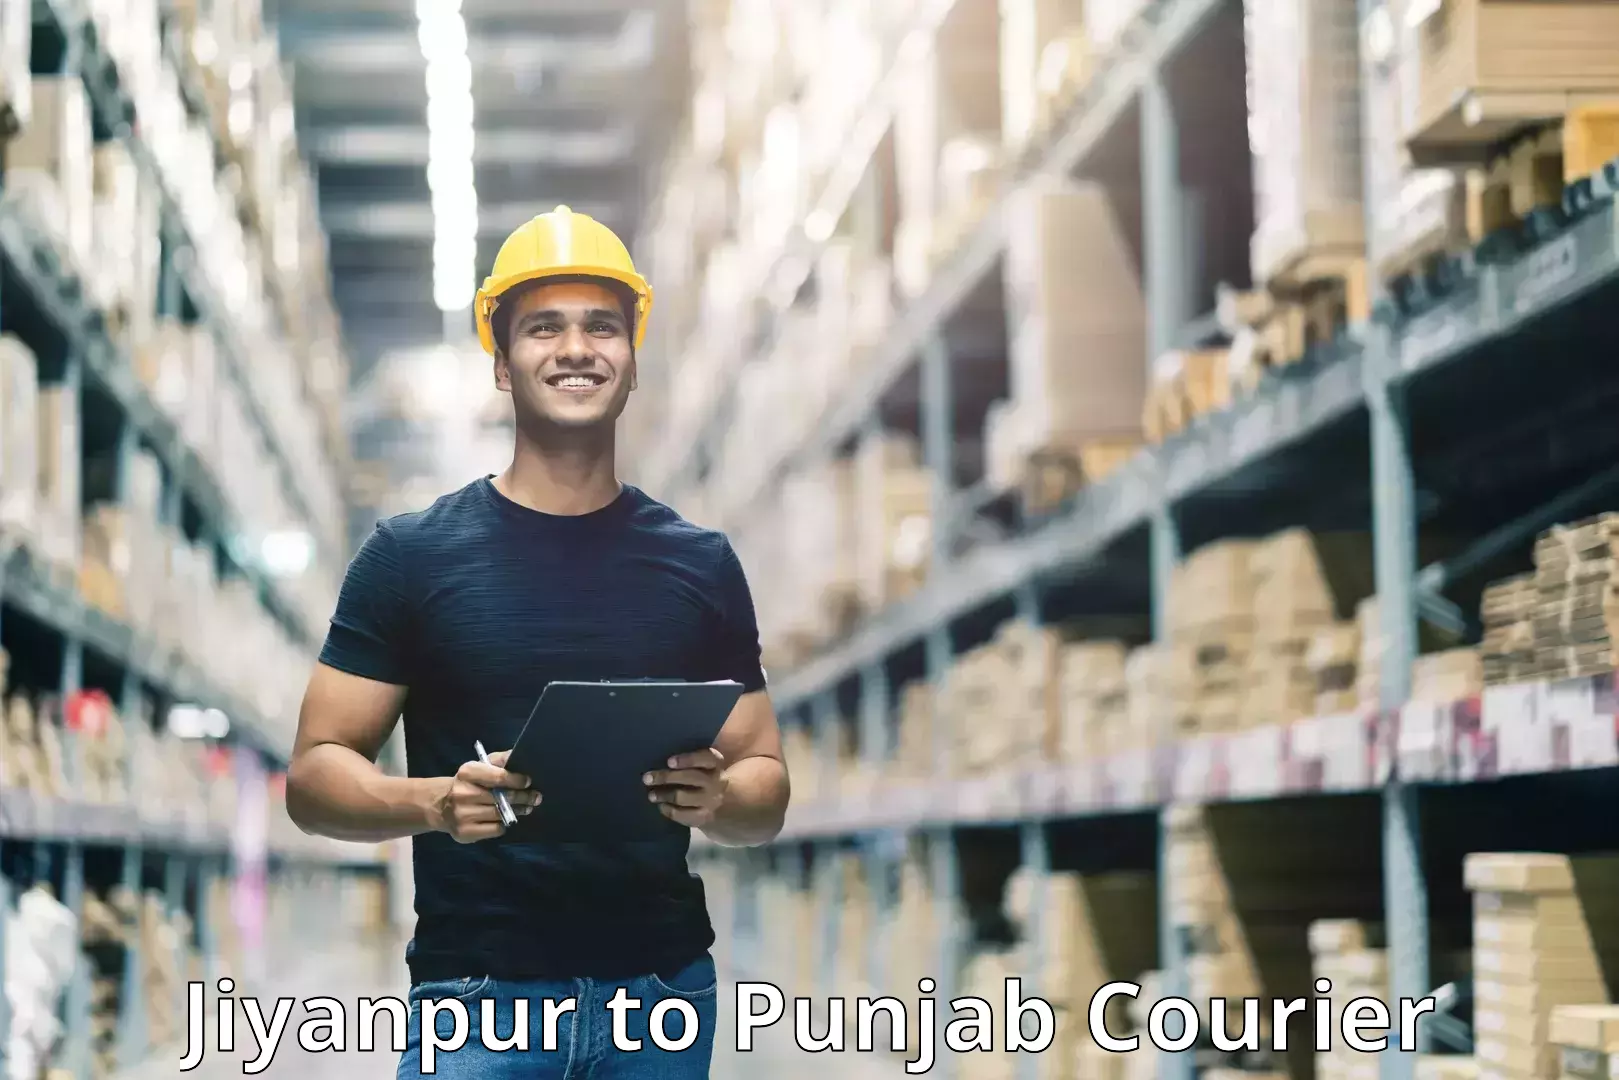 Rapid shipping services Jiyanpur to Malout